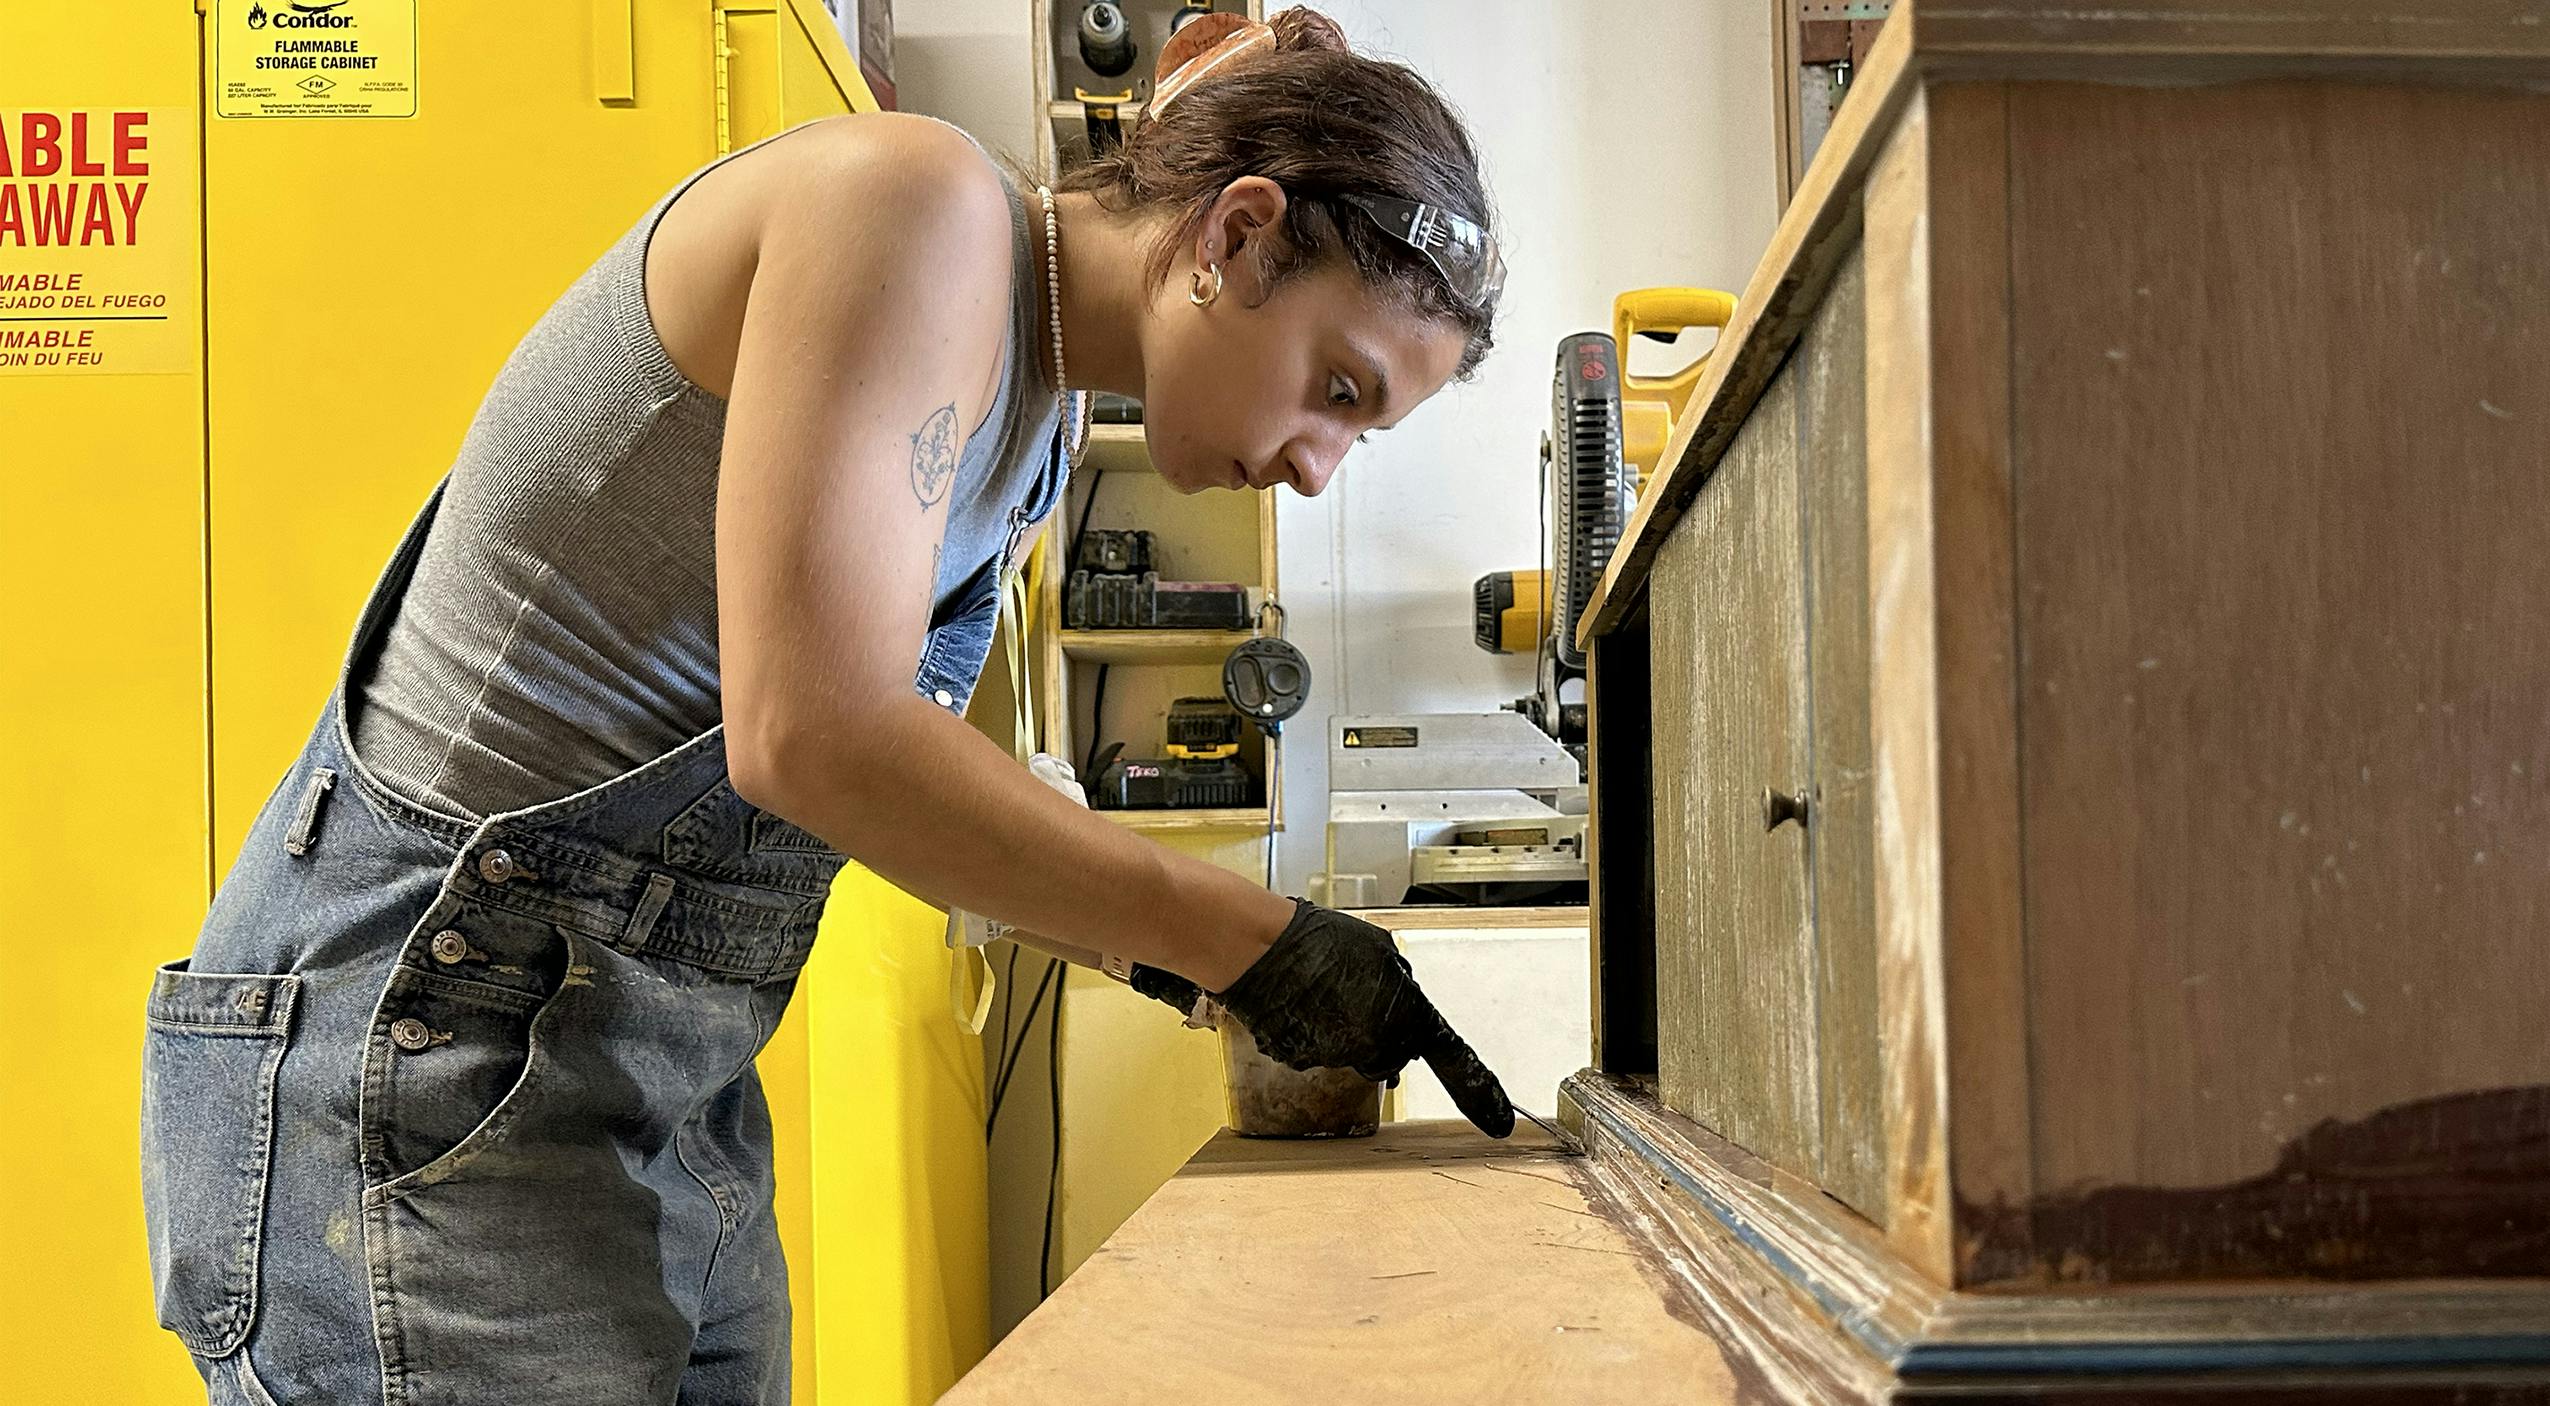 A young woman, wearing a gray top and denim overalls with gloves and safety glasses, works on a wooden desk in a scene shop.